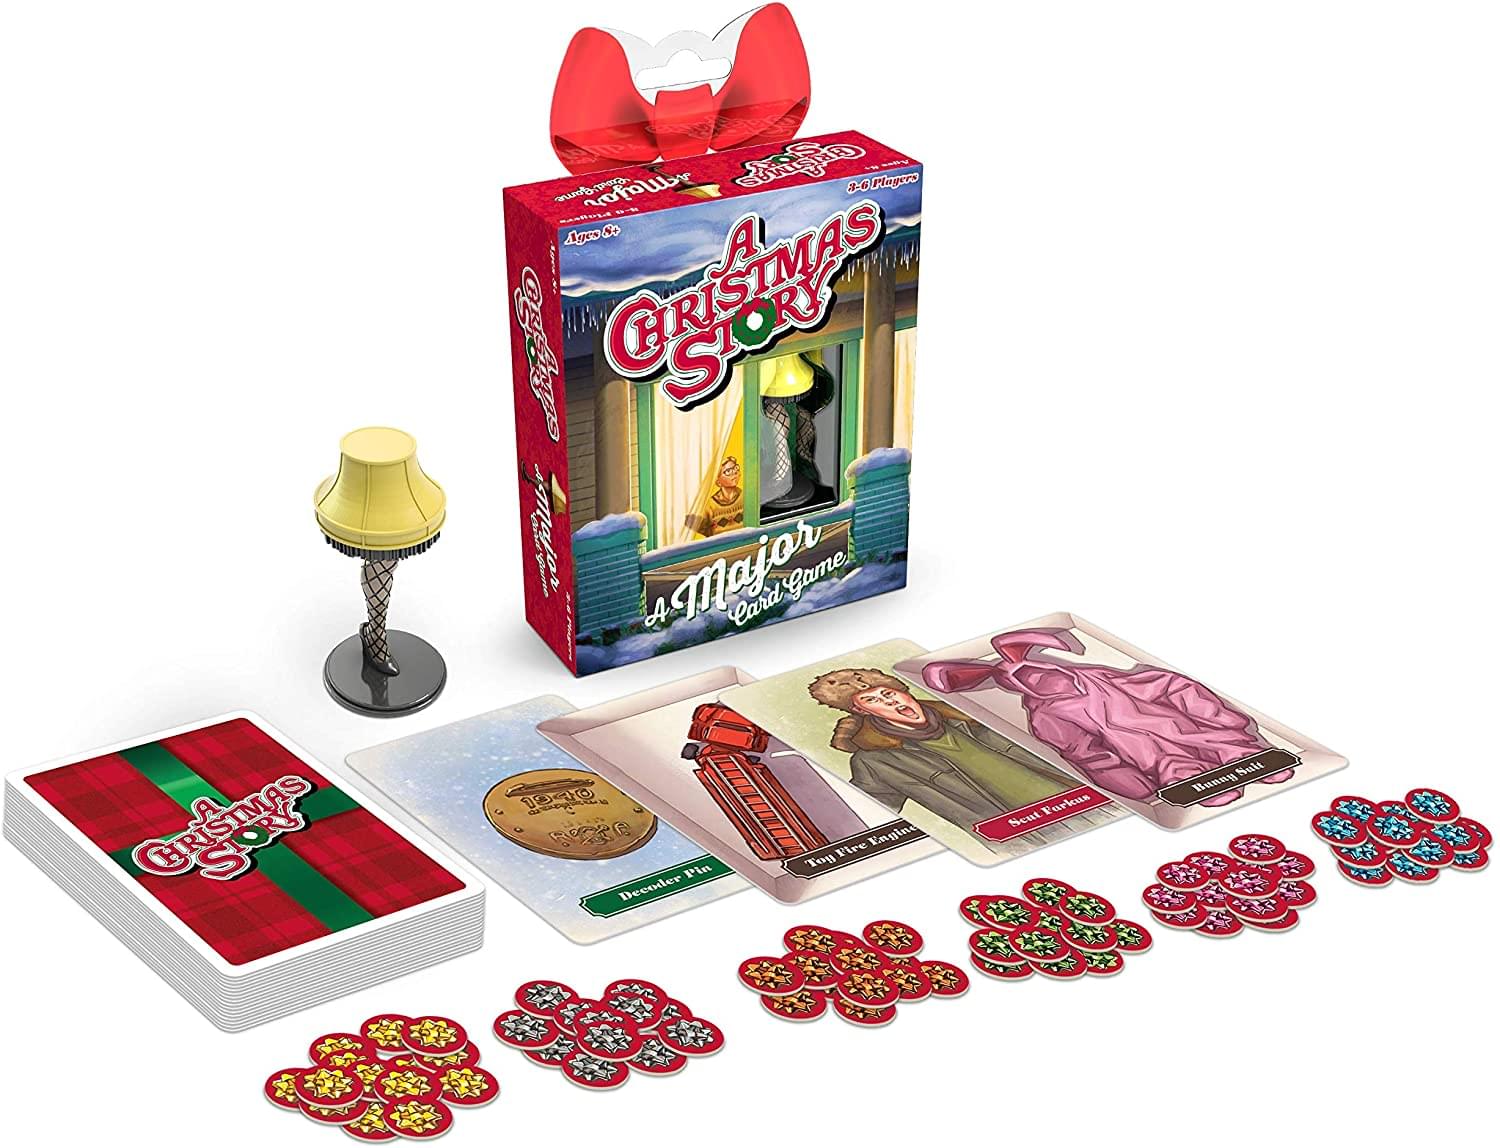 A Christmas Story A Major Card Game | For 3-6 Players